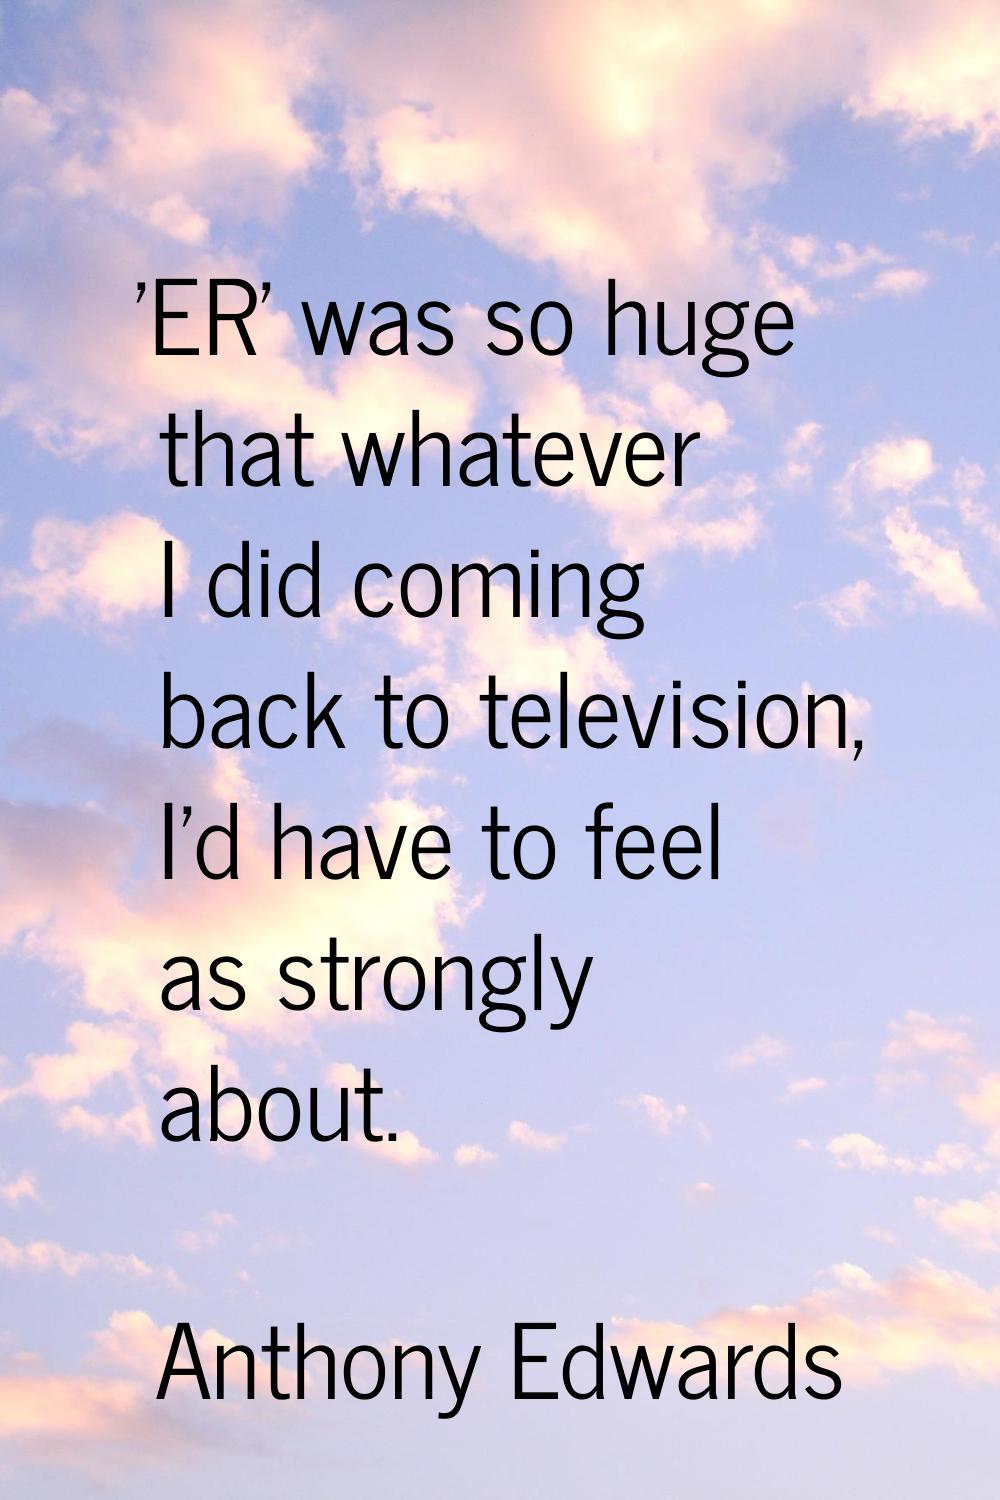 'ER' was so huge that whatever I did coming back to television, I'd have to feel as strongly about.